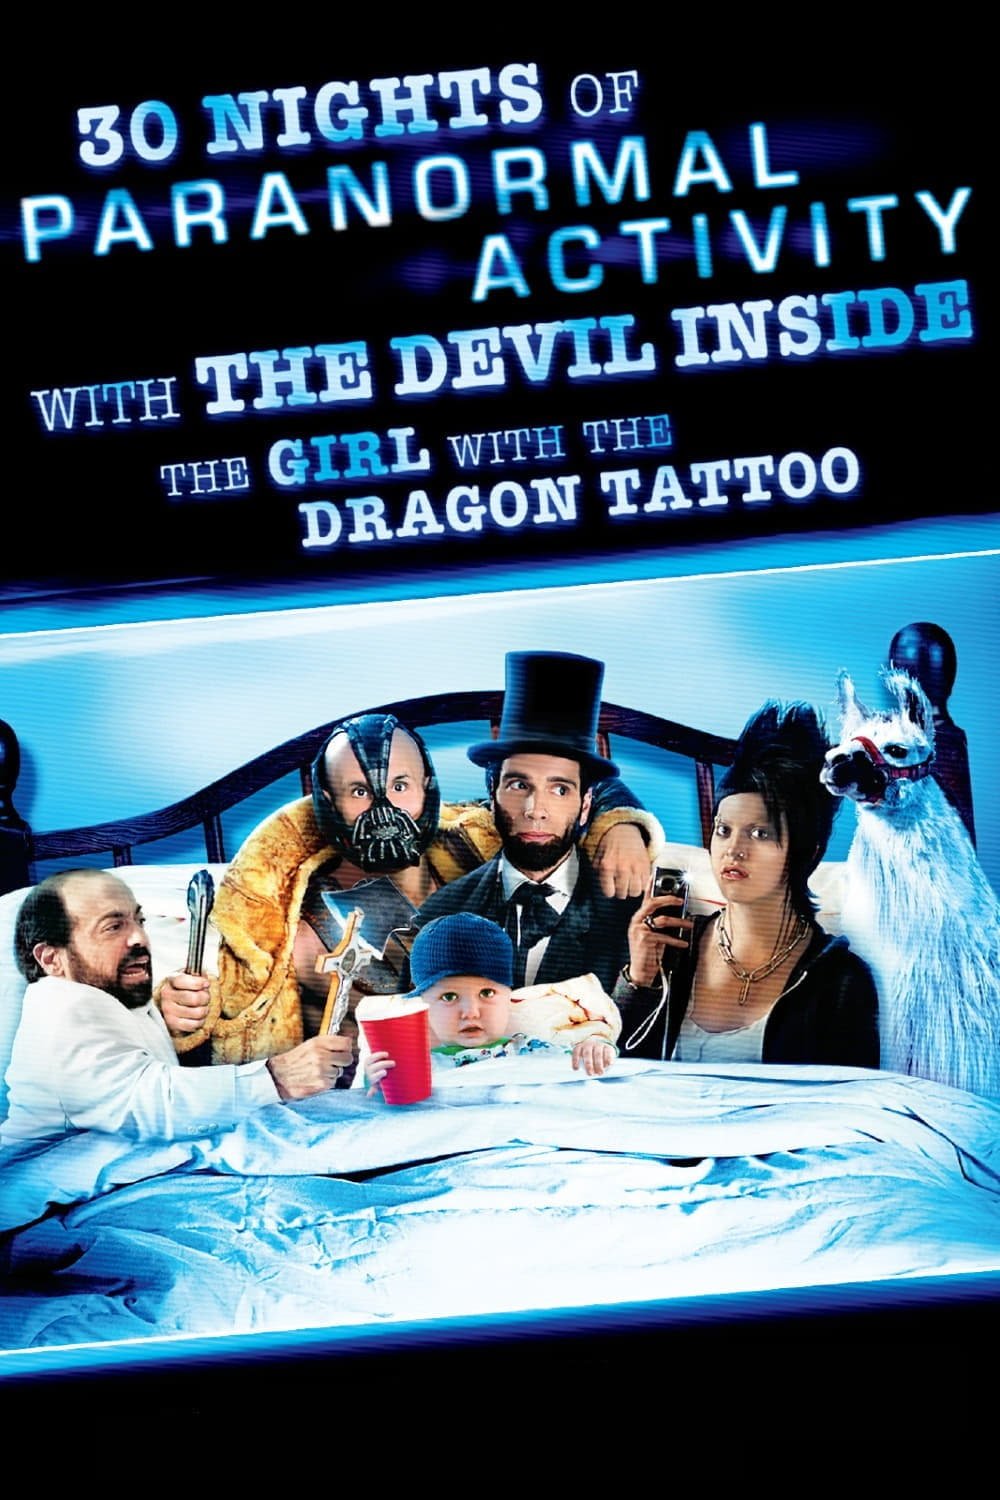 30 Nights of Paranormal Activity With the Devil Inside the Girl With the Dragon Tattoo [Sub-ITA] (2013)